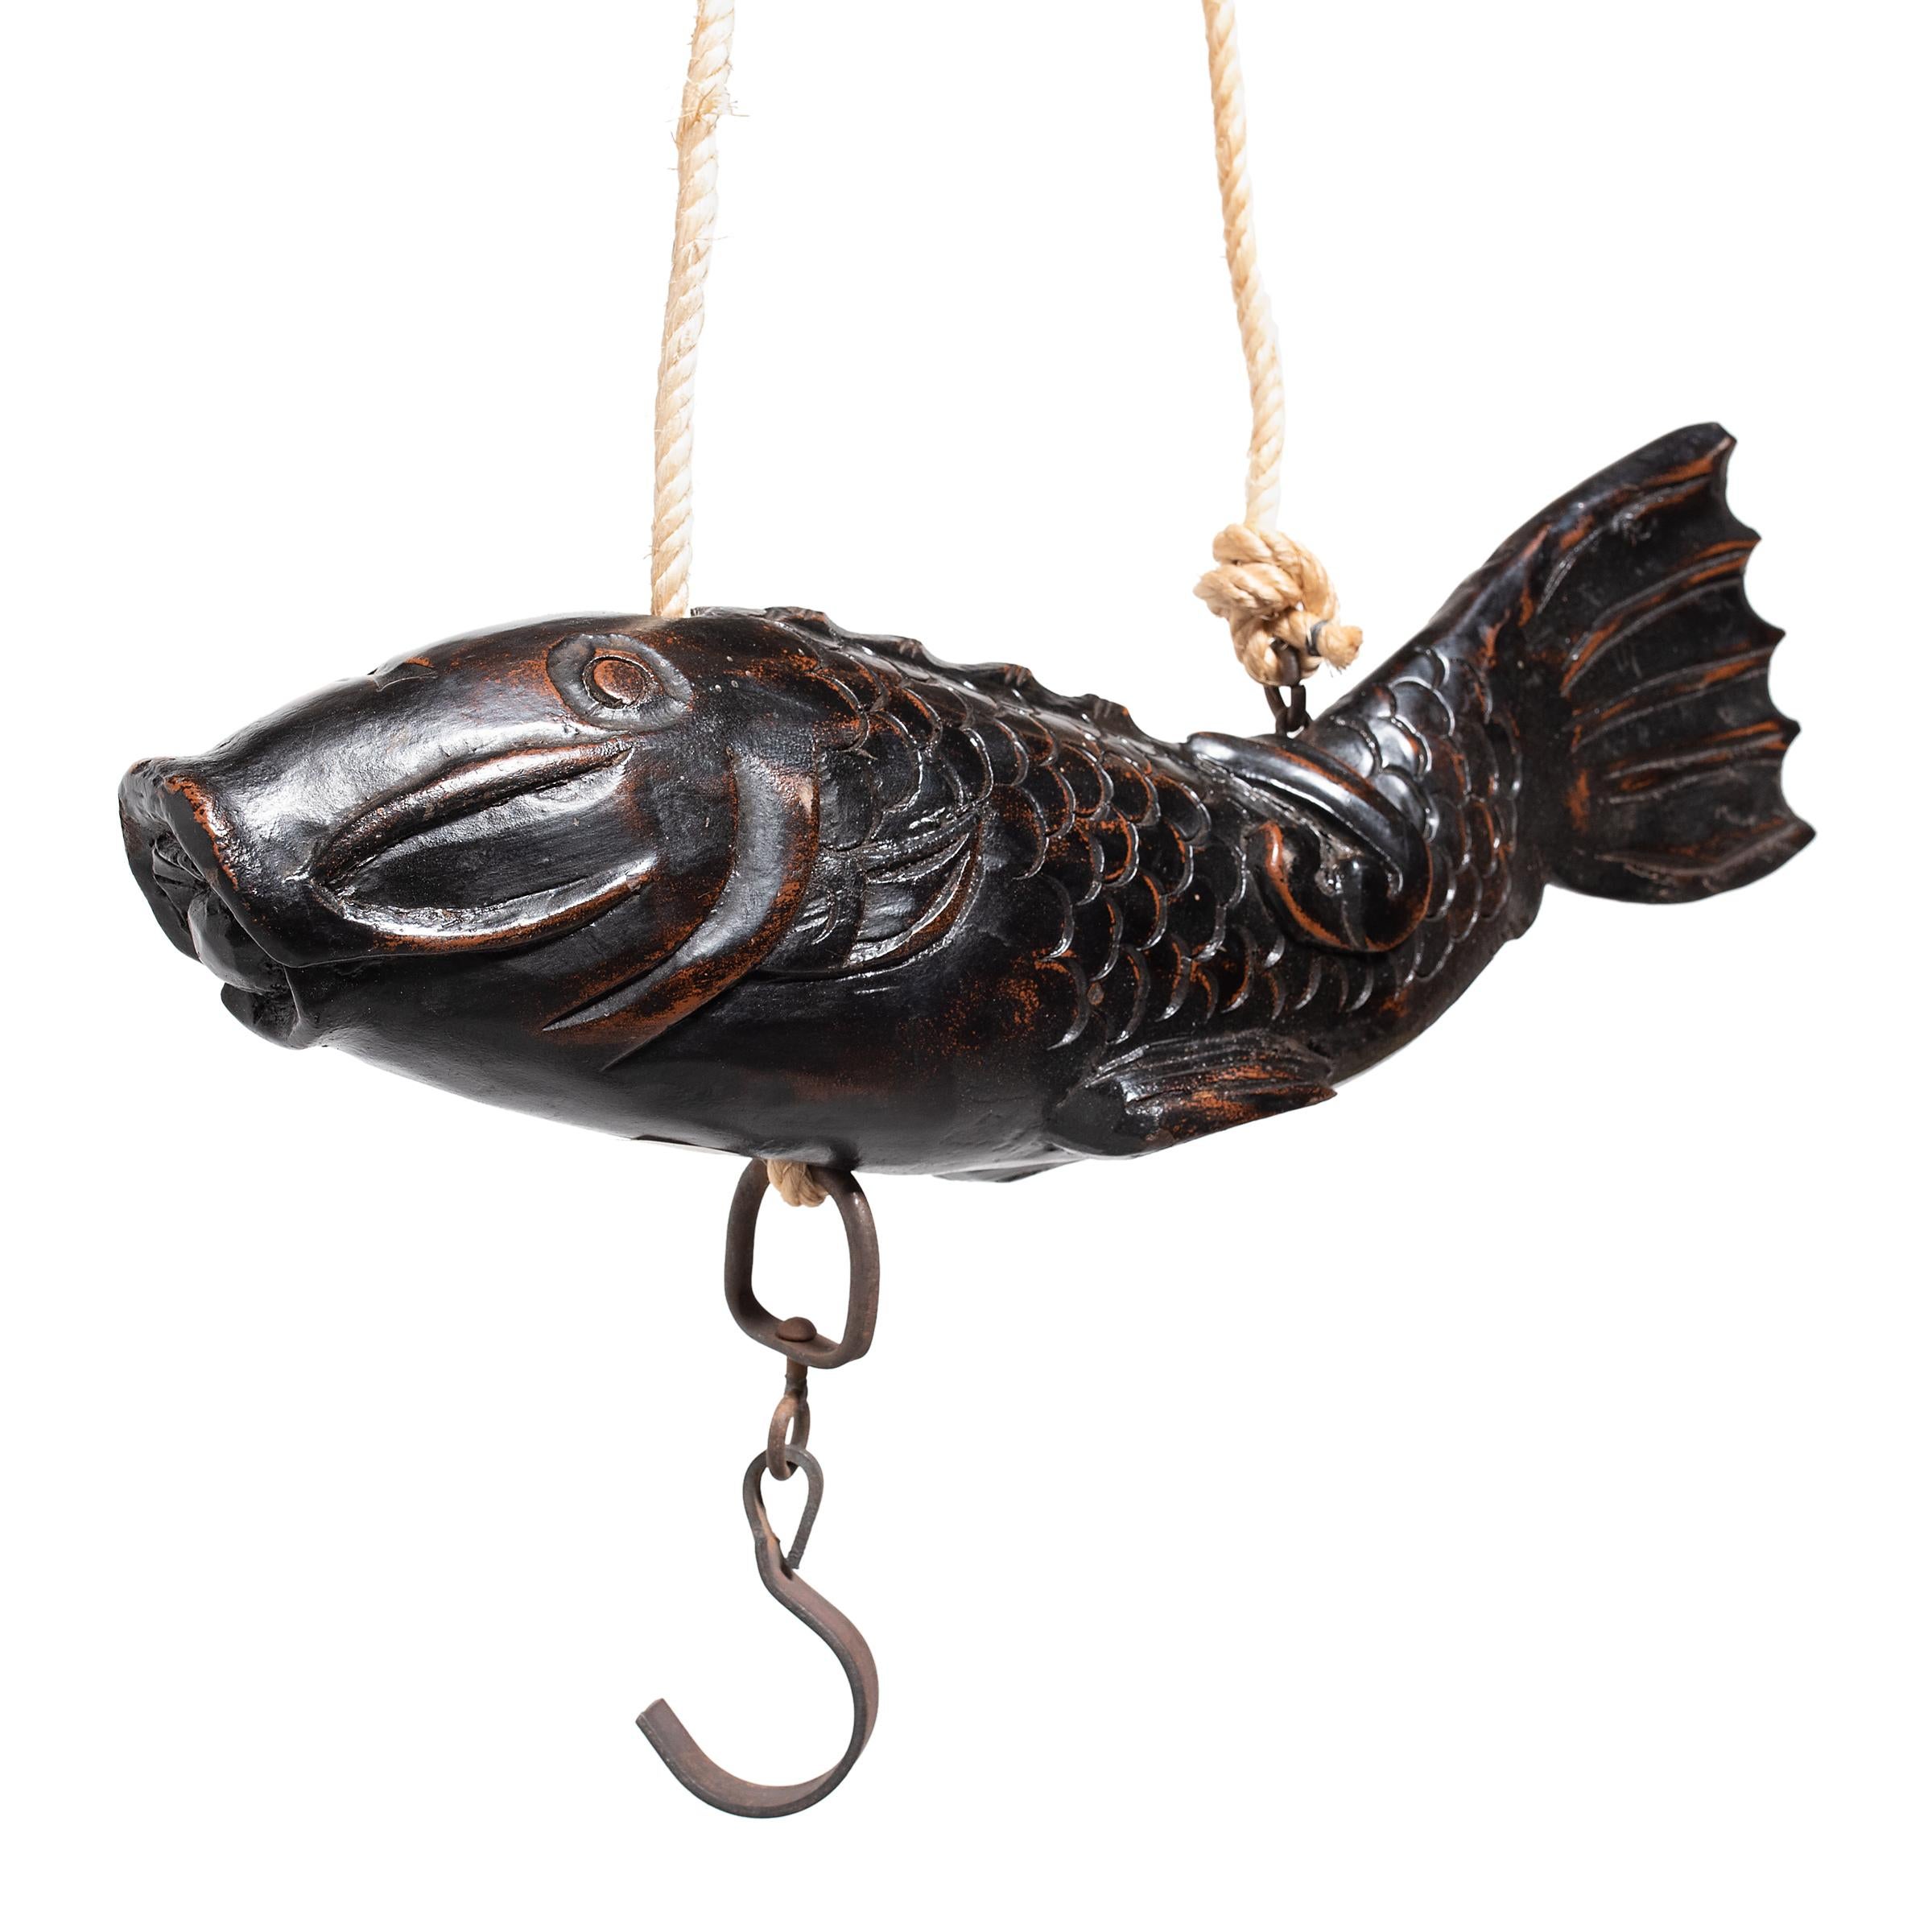 This lively wooden fish dates to the mid-19th century and was originally the lever mechanism on a traditional Japanese hearth hook, called a jizai kagi. Hung from the ceiling above an indoor floor hearth (irori), jizai kagi pothooks were used to